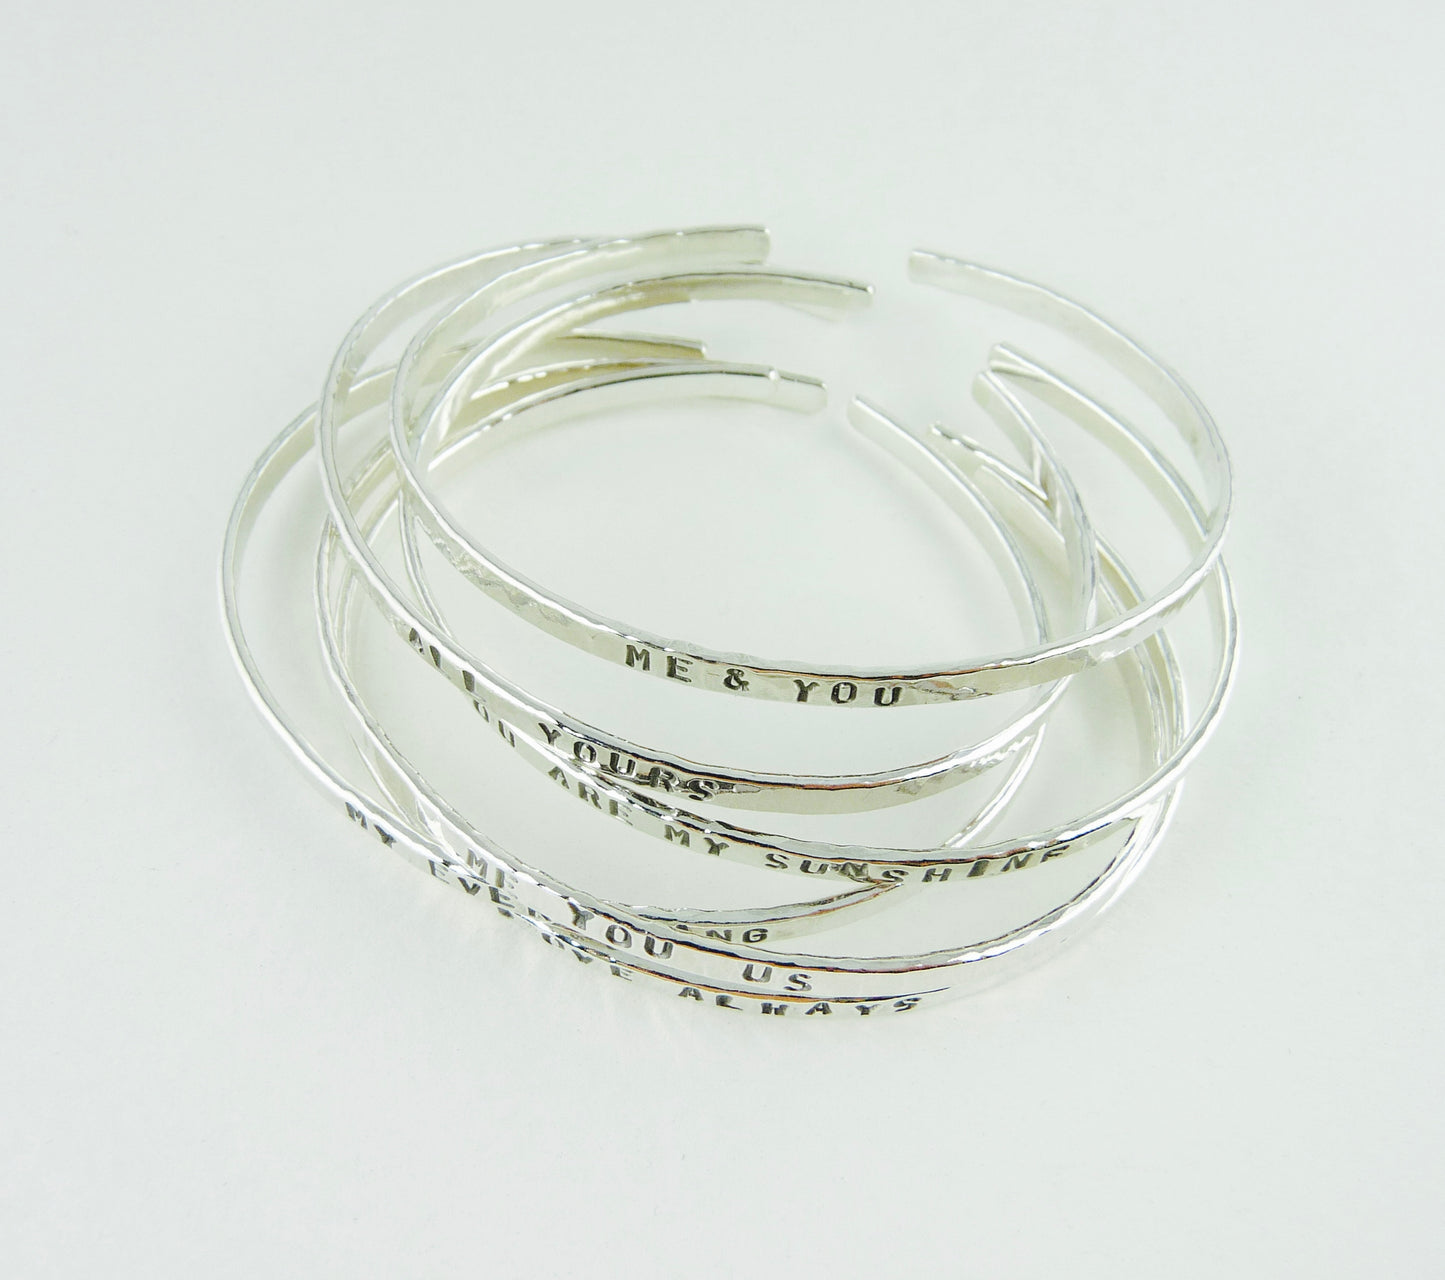 Bangle With Personalised Message